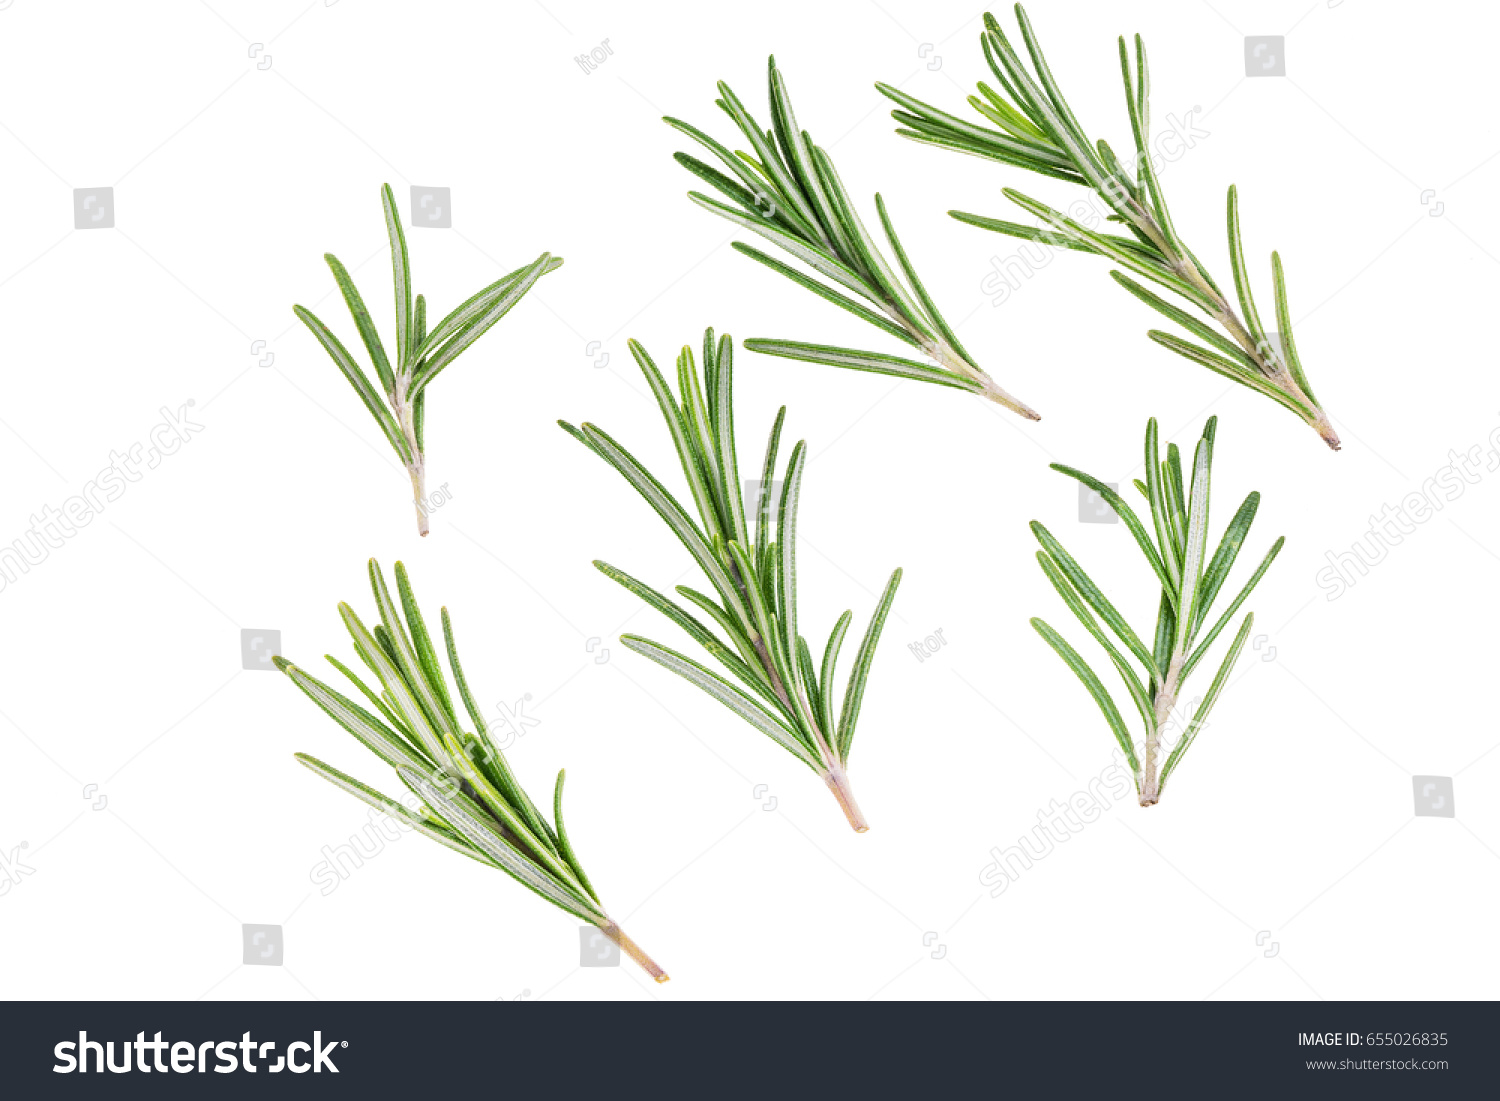 Fresh green sprig of rosemary isolated on a white background #655026835